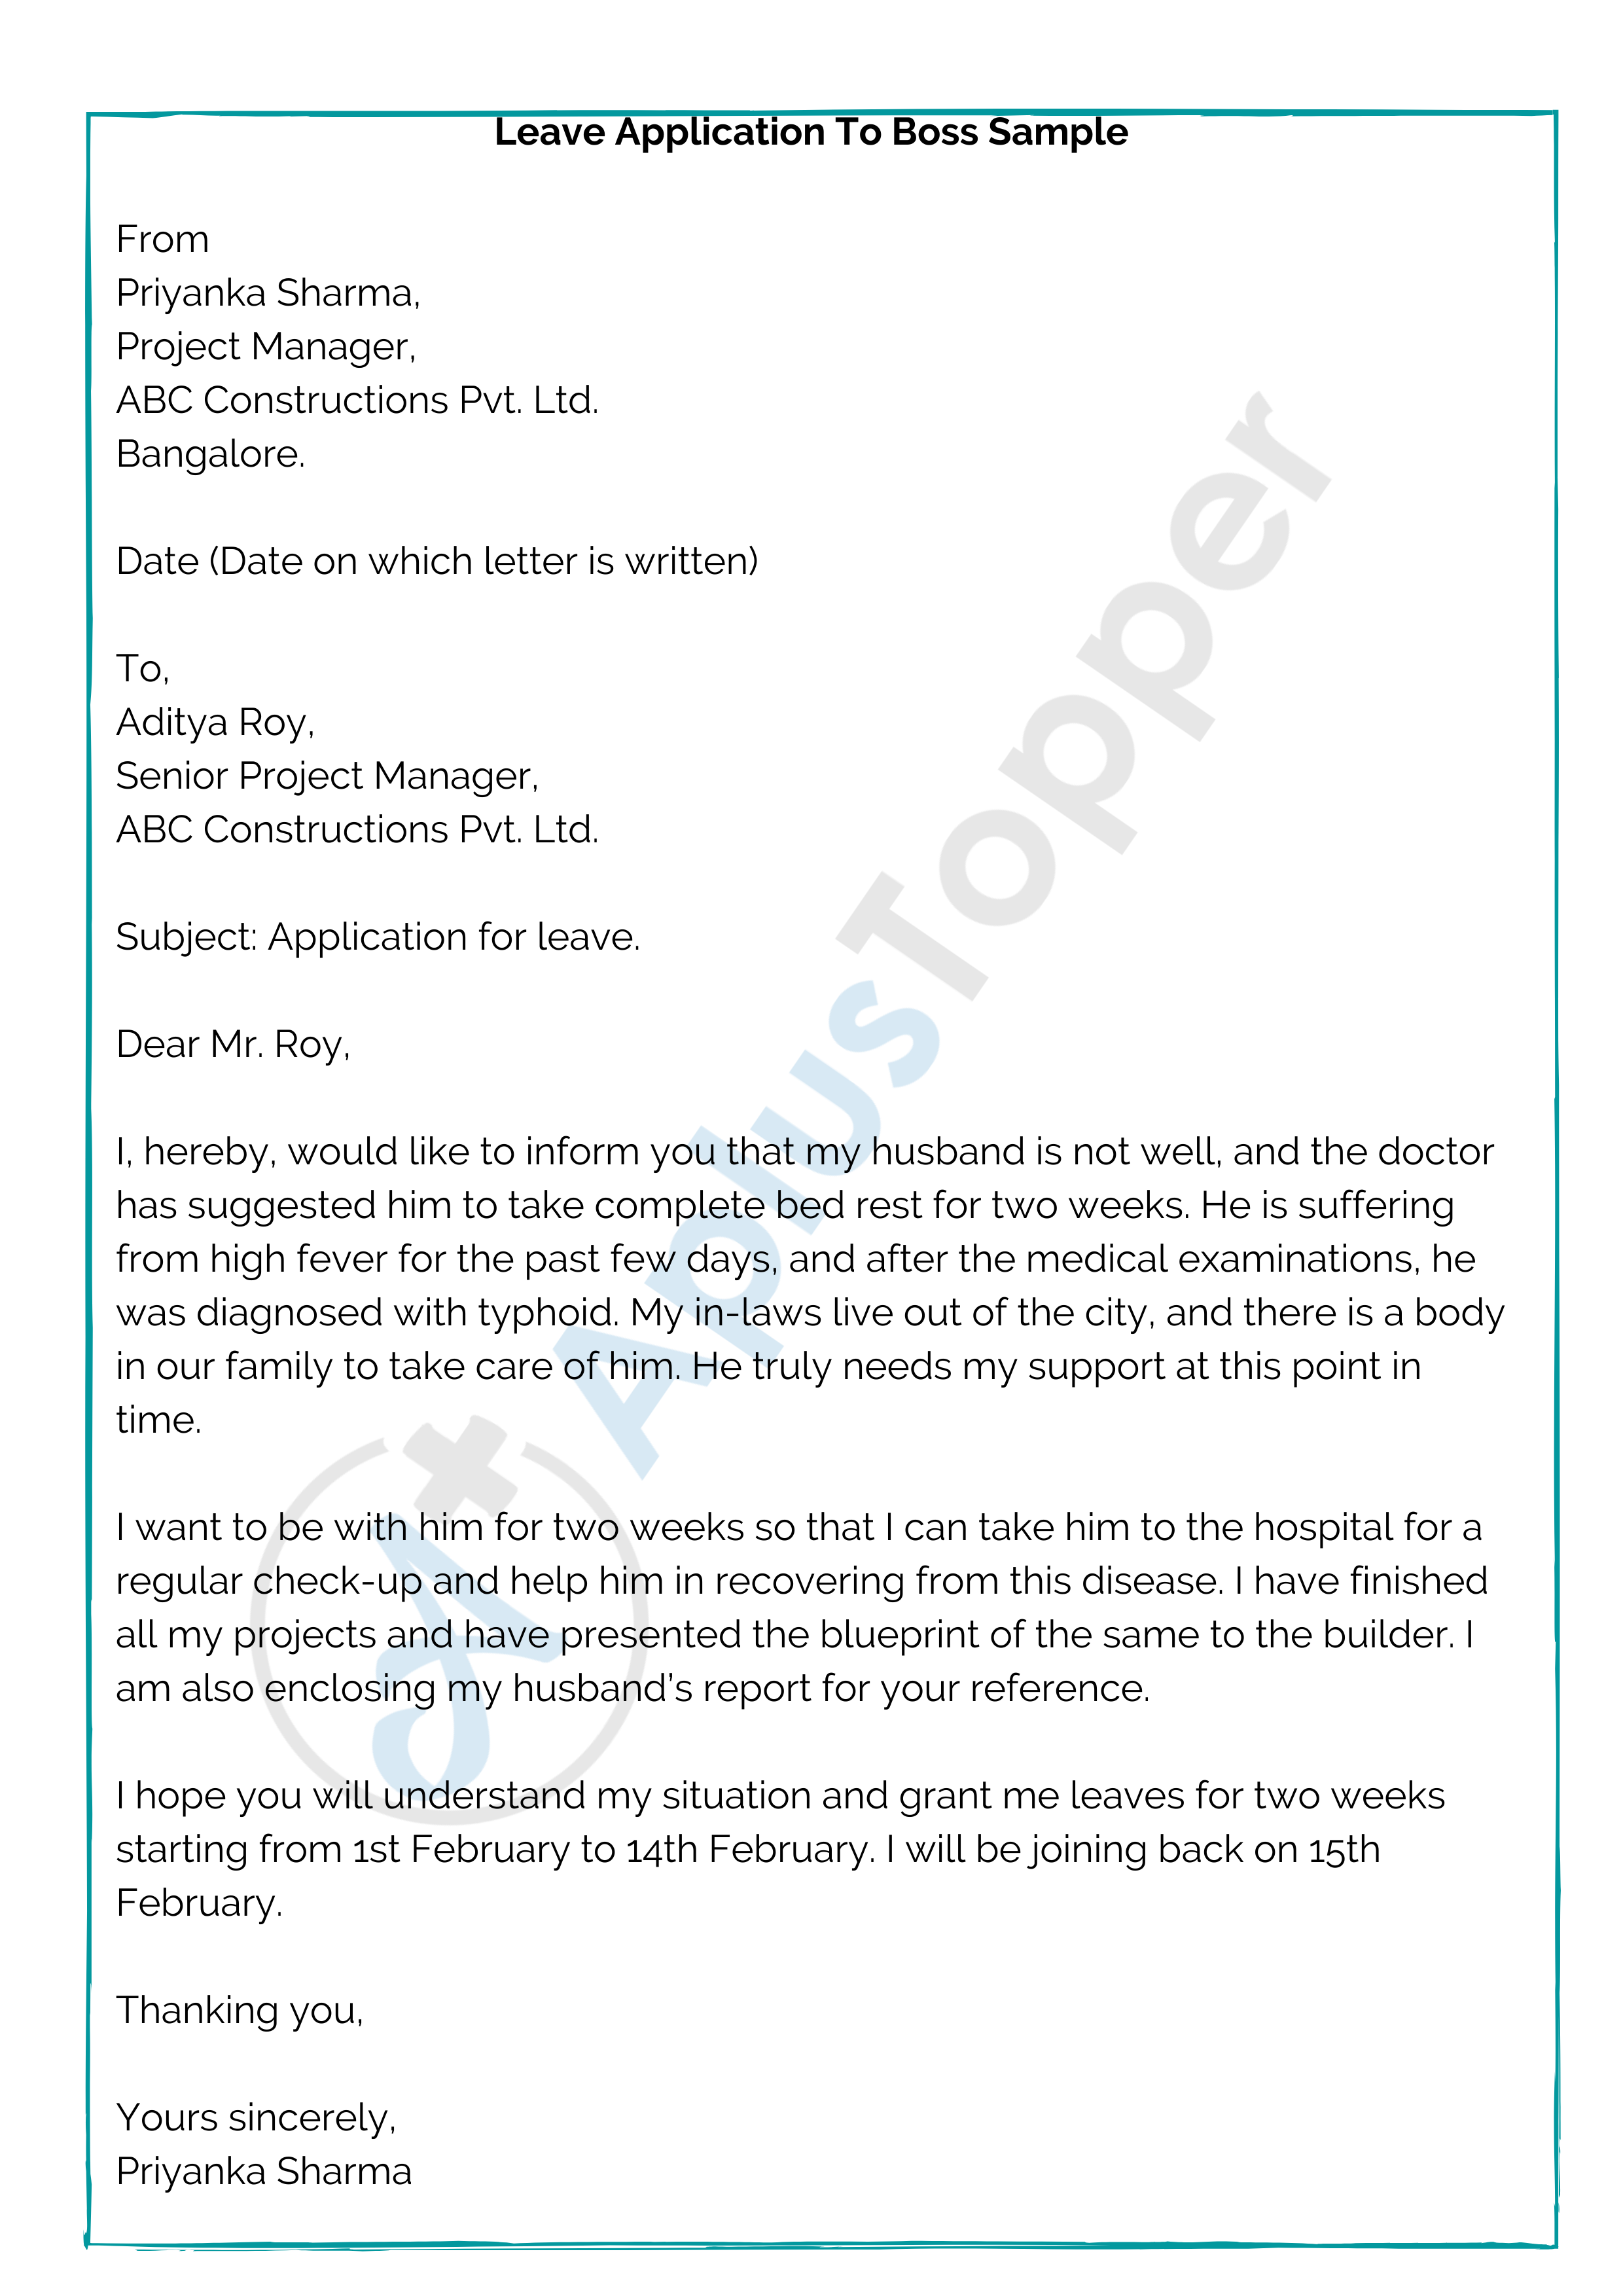 Leave Application To Boss  How To Write A Leave Application